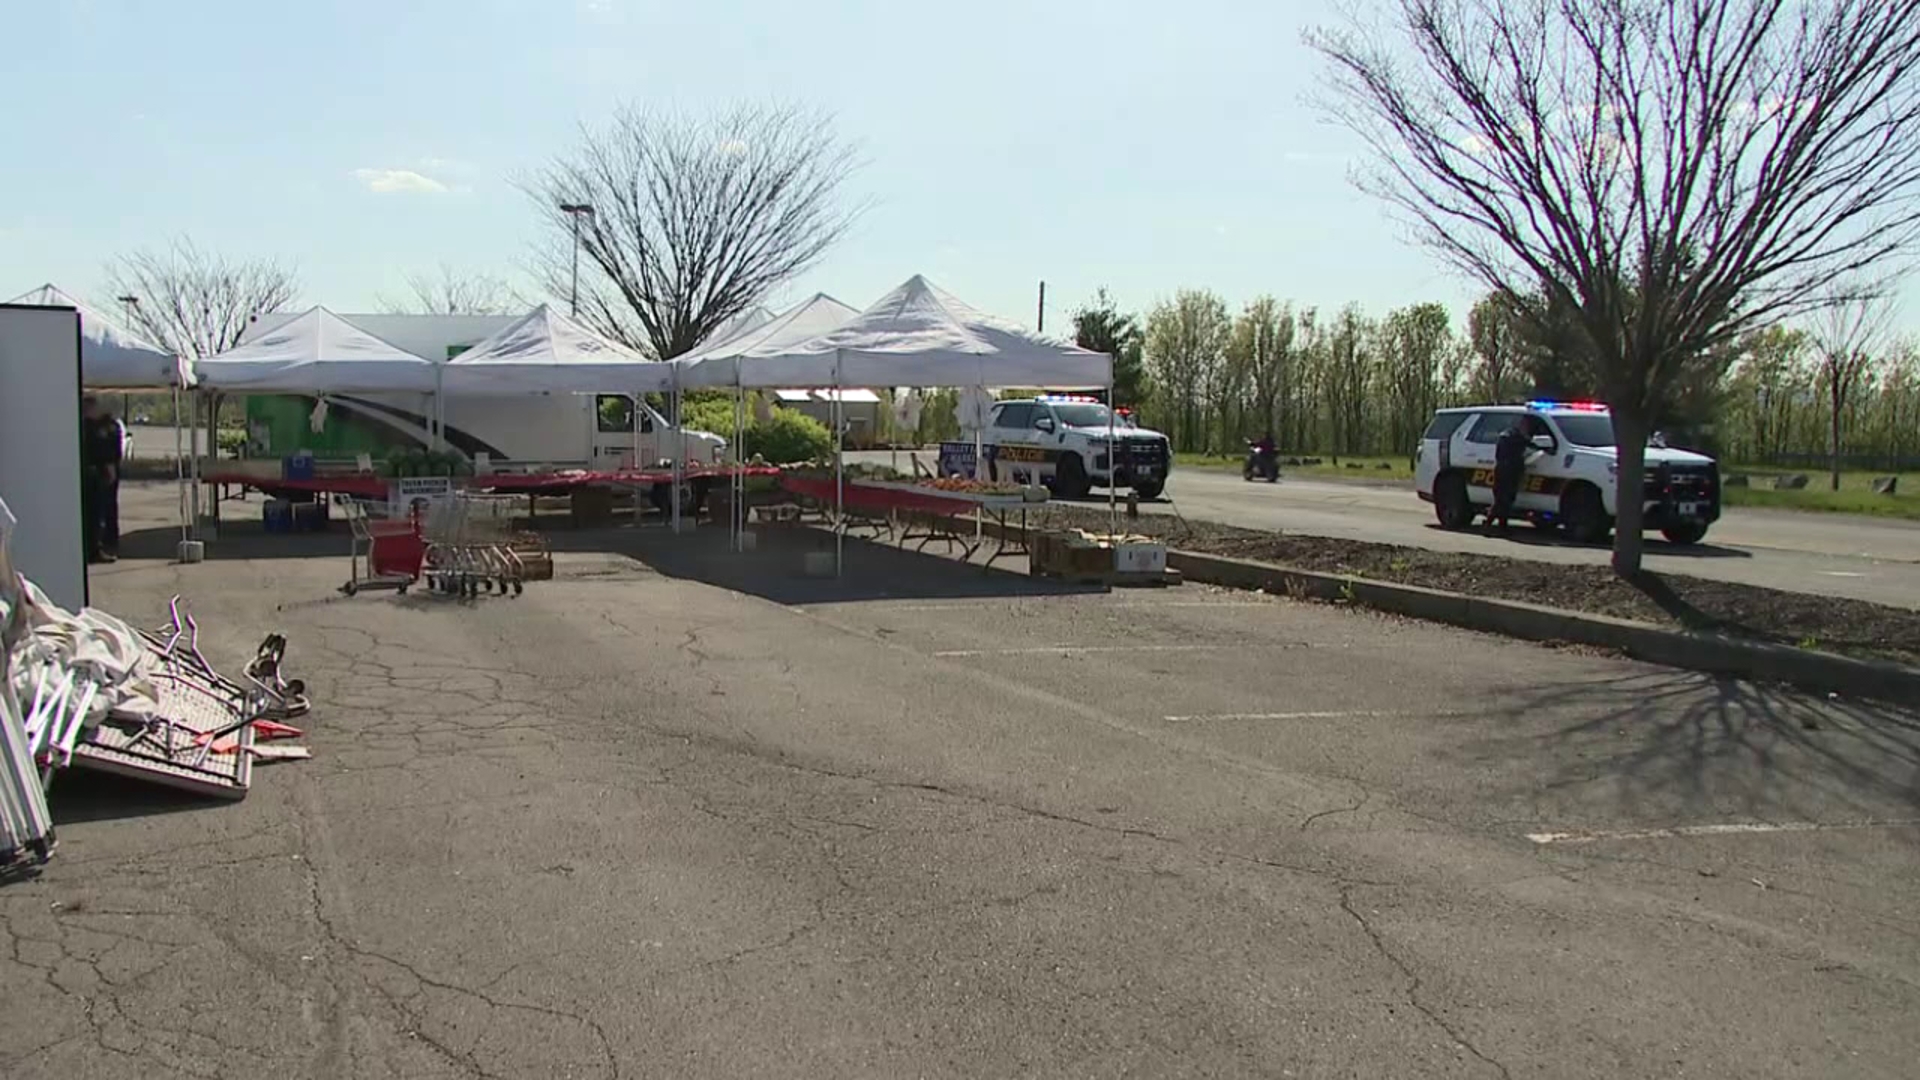 A crash caused a mess at a farmers market near Wilkes-Barre on Friday.